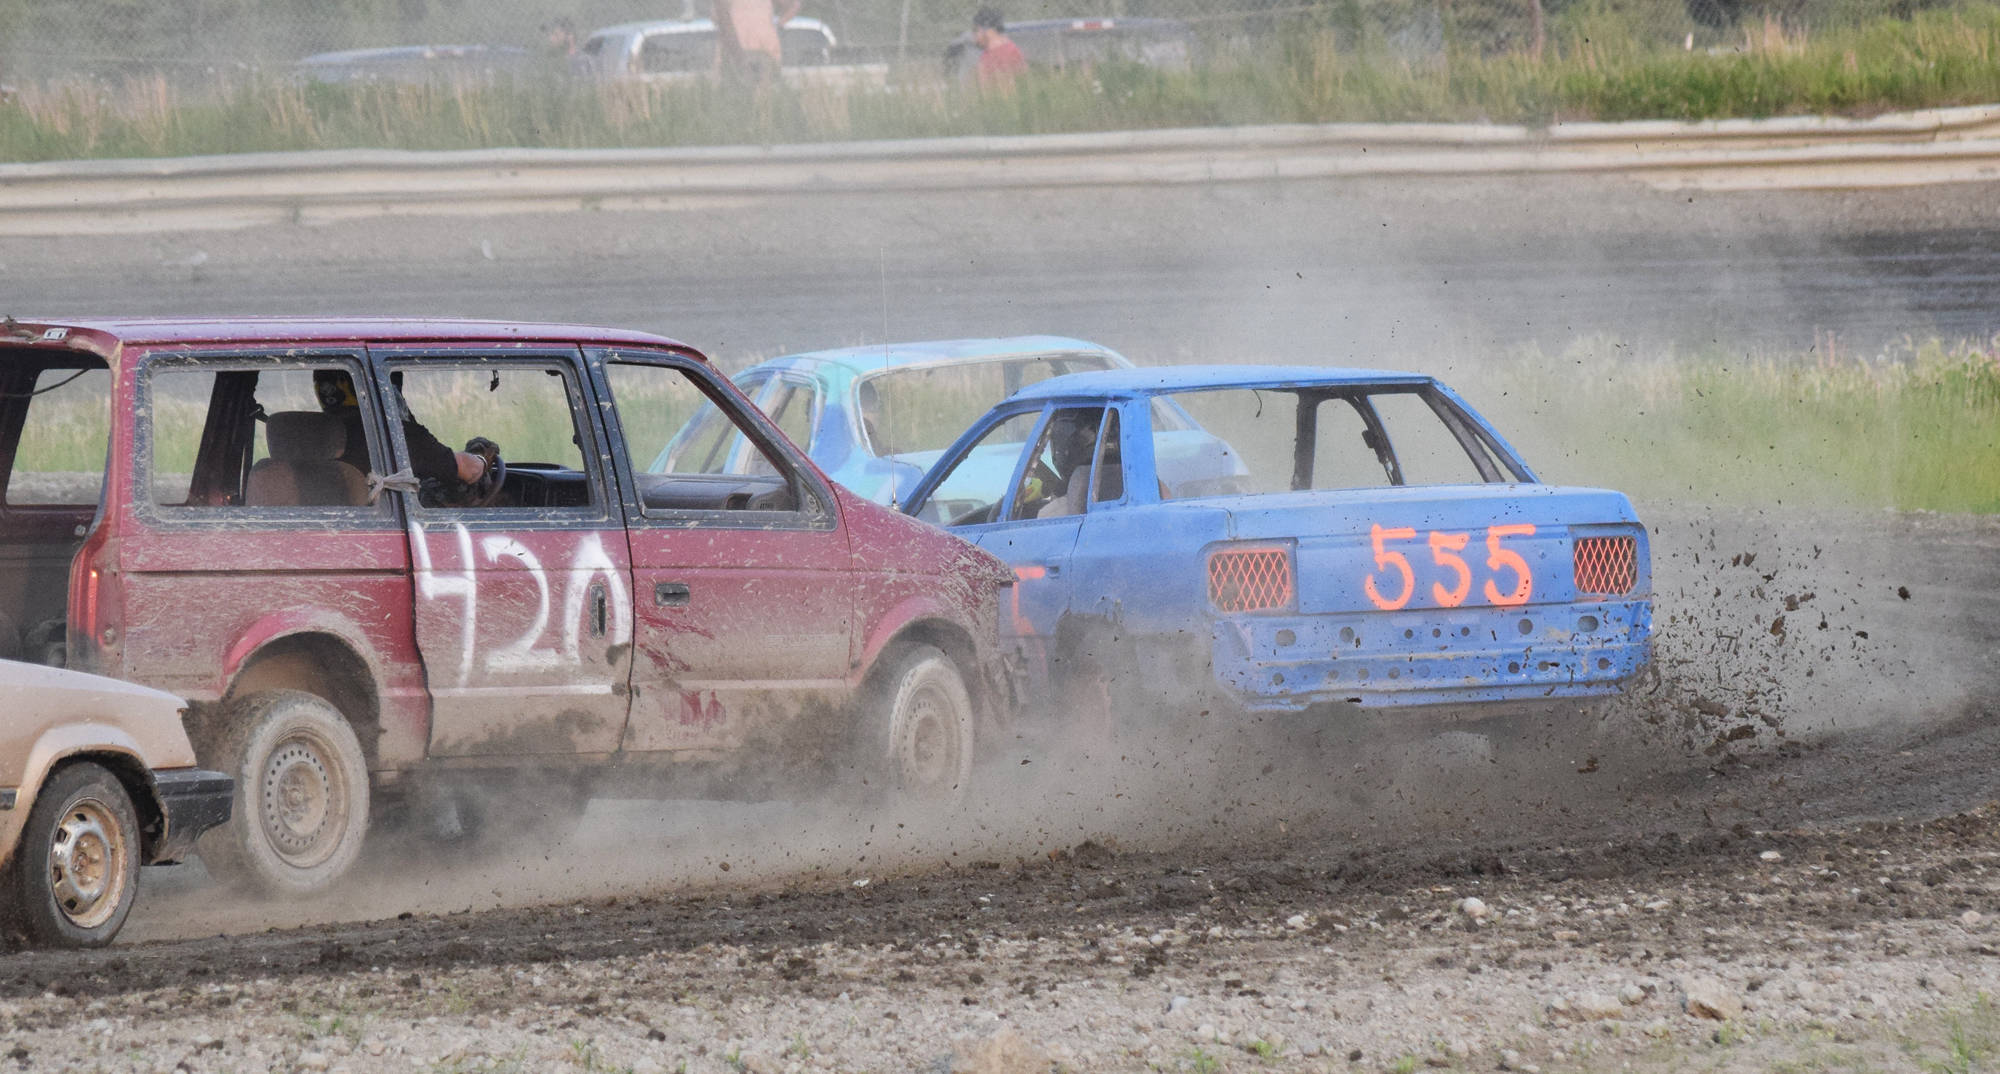 Brick Marcorelle in the #420 van spins out the driver of the #555 car in the Dollar Stock feature race Saturday, June 29, 2019, at Twin Cities Raceway in Kenai, Alaska. (Photo by Joey Klecka/Peninsula Clarion)